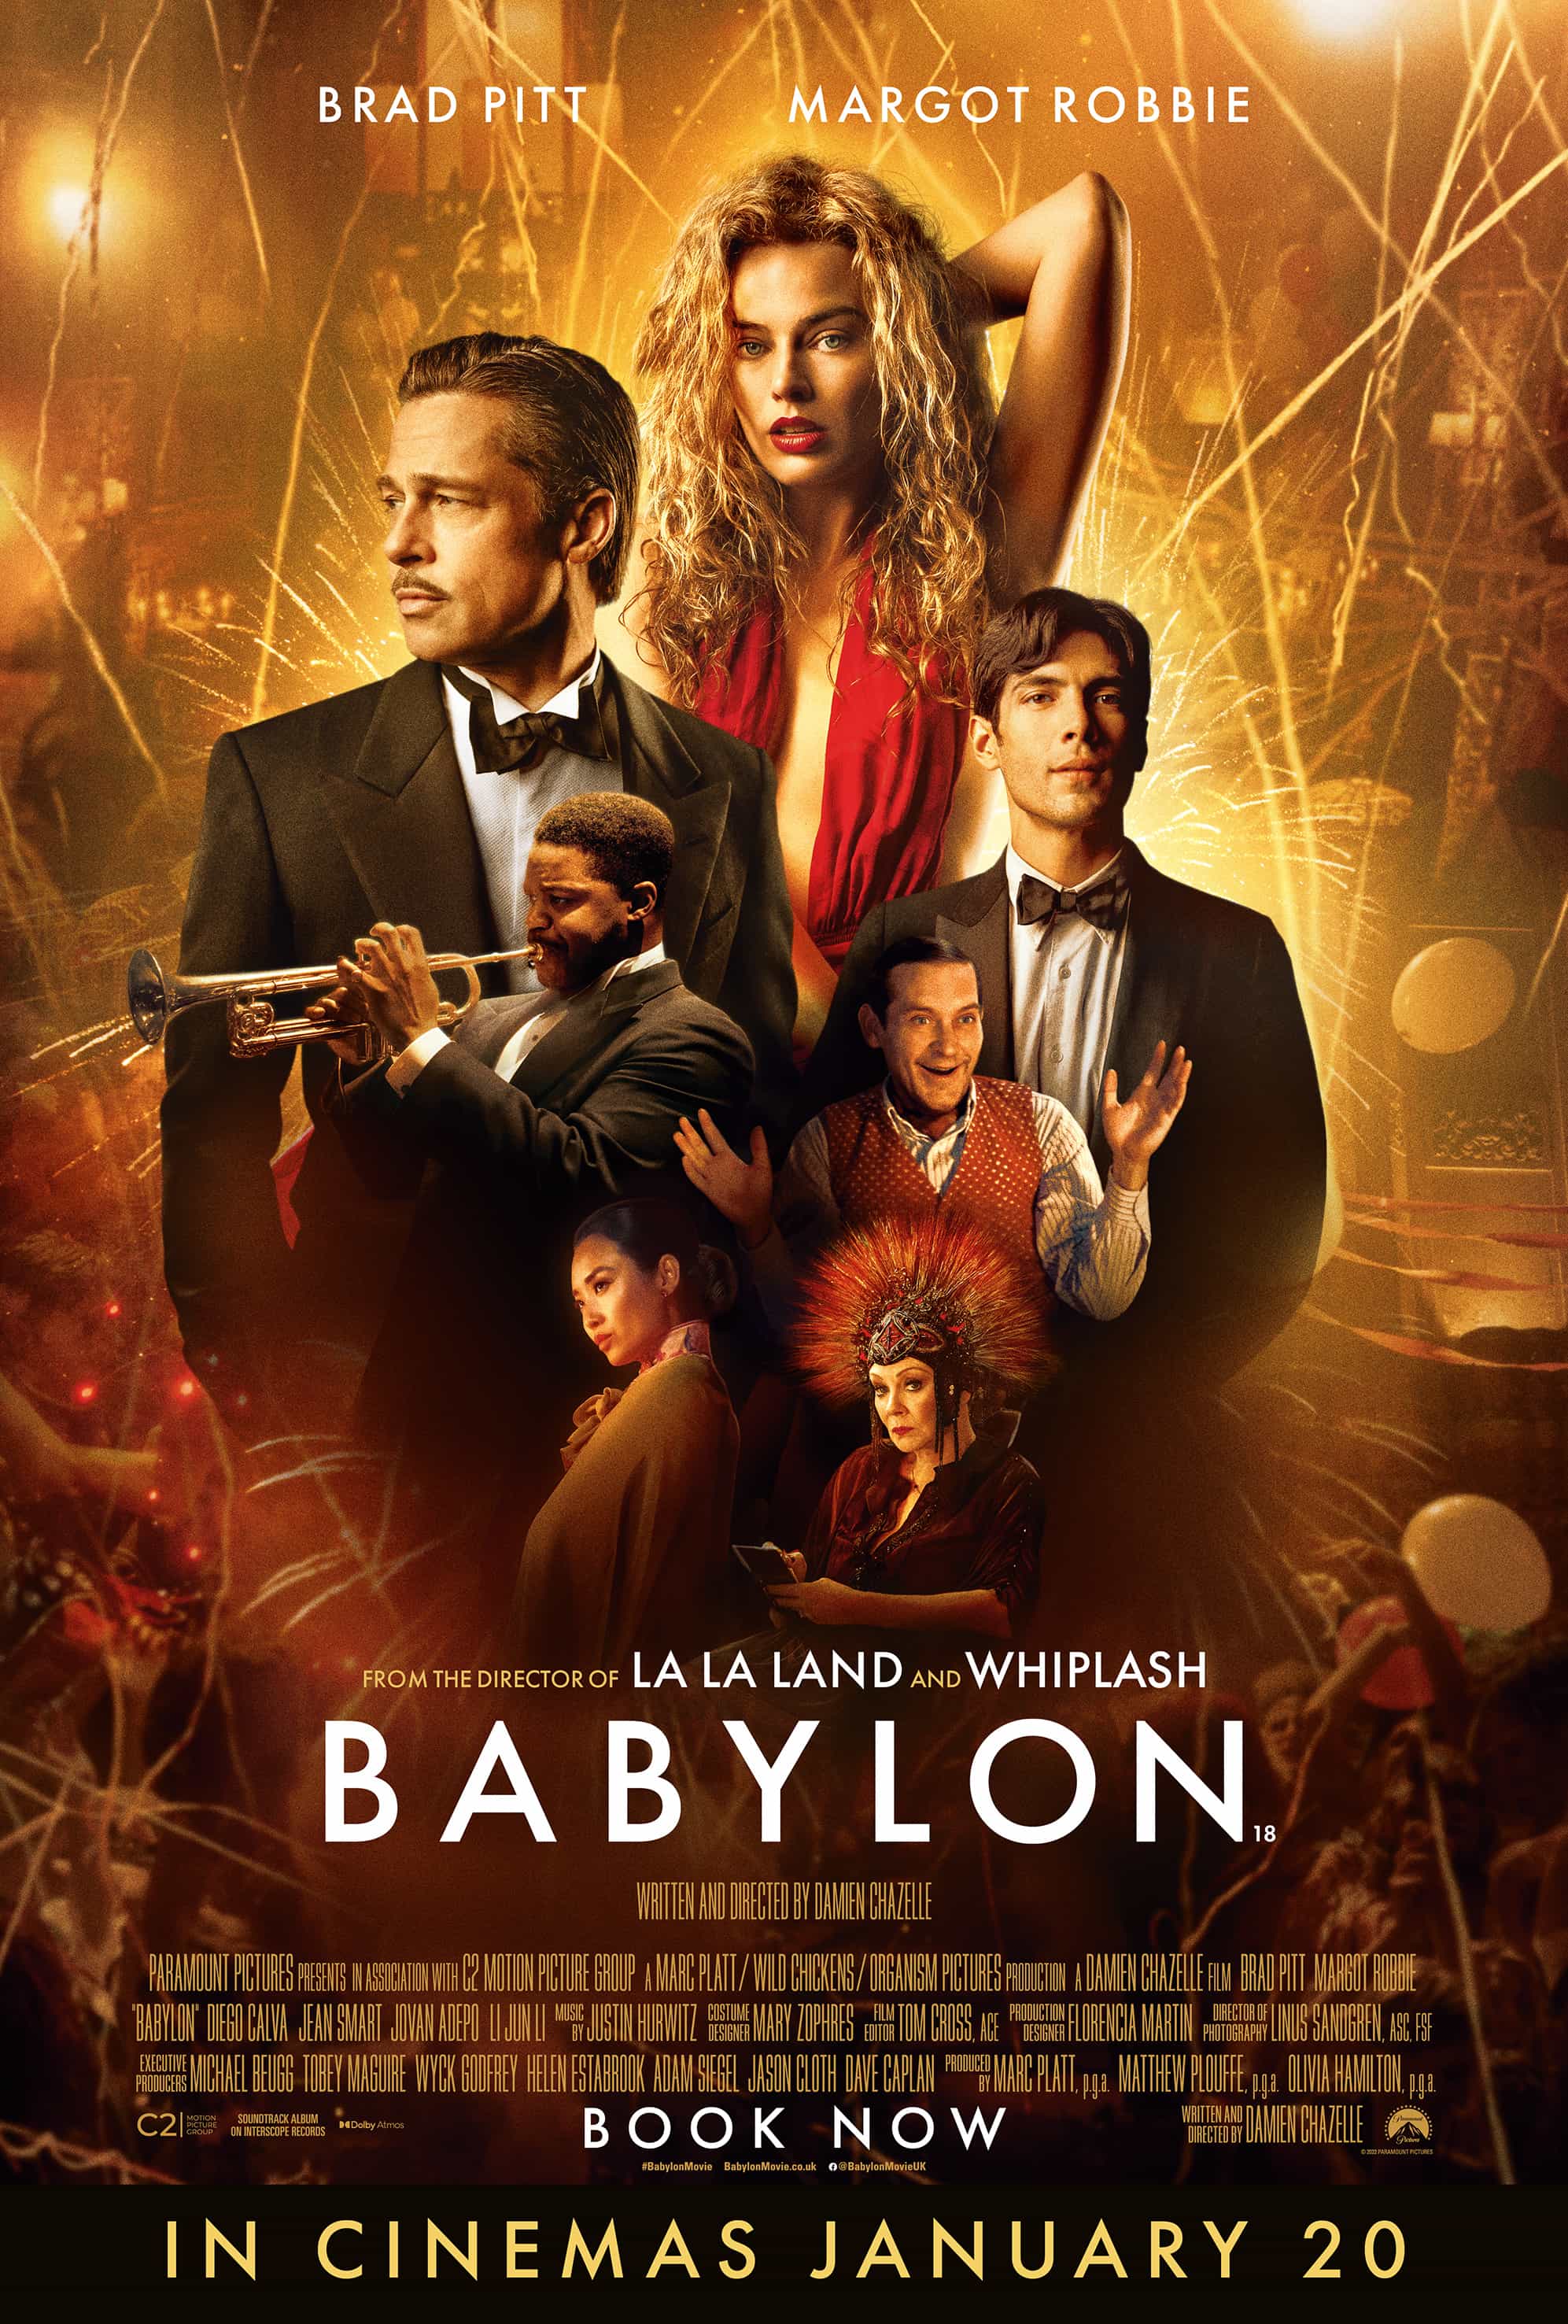 This weeks UK new movie preview 20th January 2023 - Babylon, Everything Under Control and The Wandering Earth 2 - #babylon #everythingundercontrol #thewanderingearth2